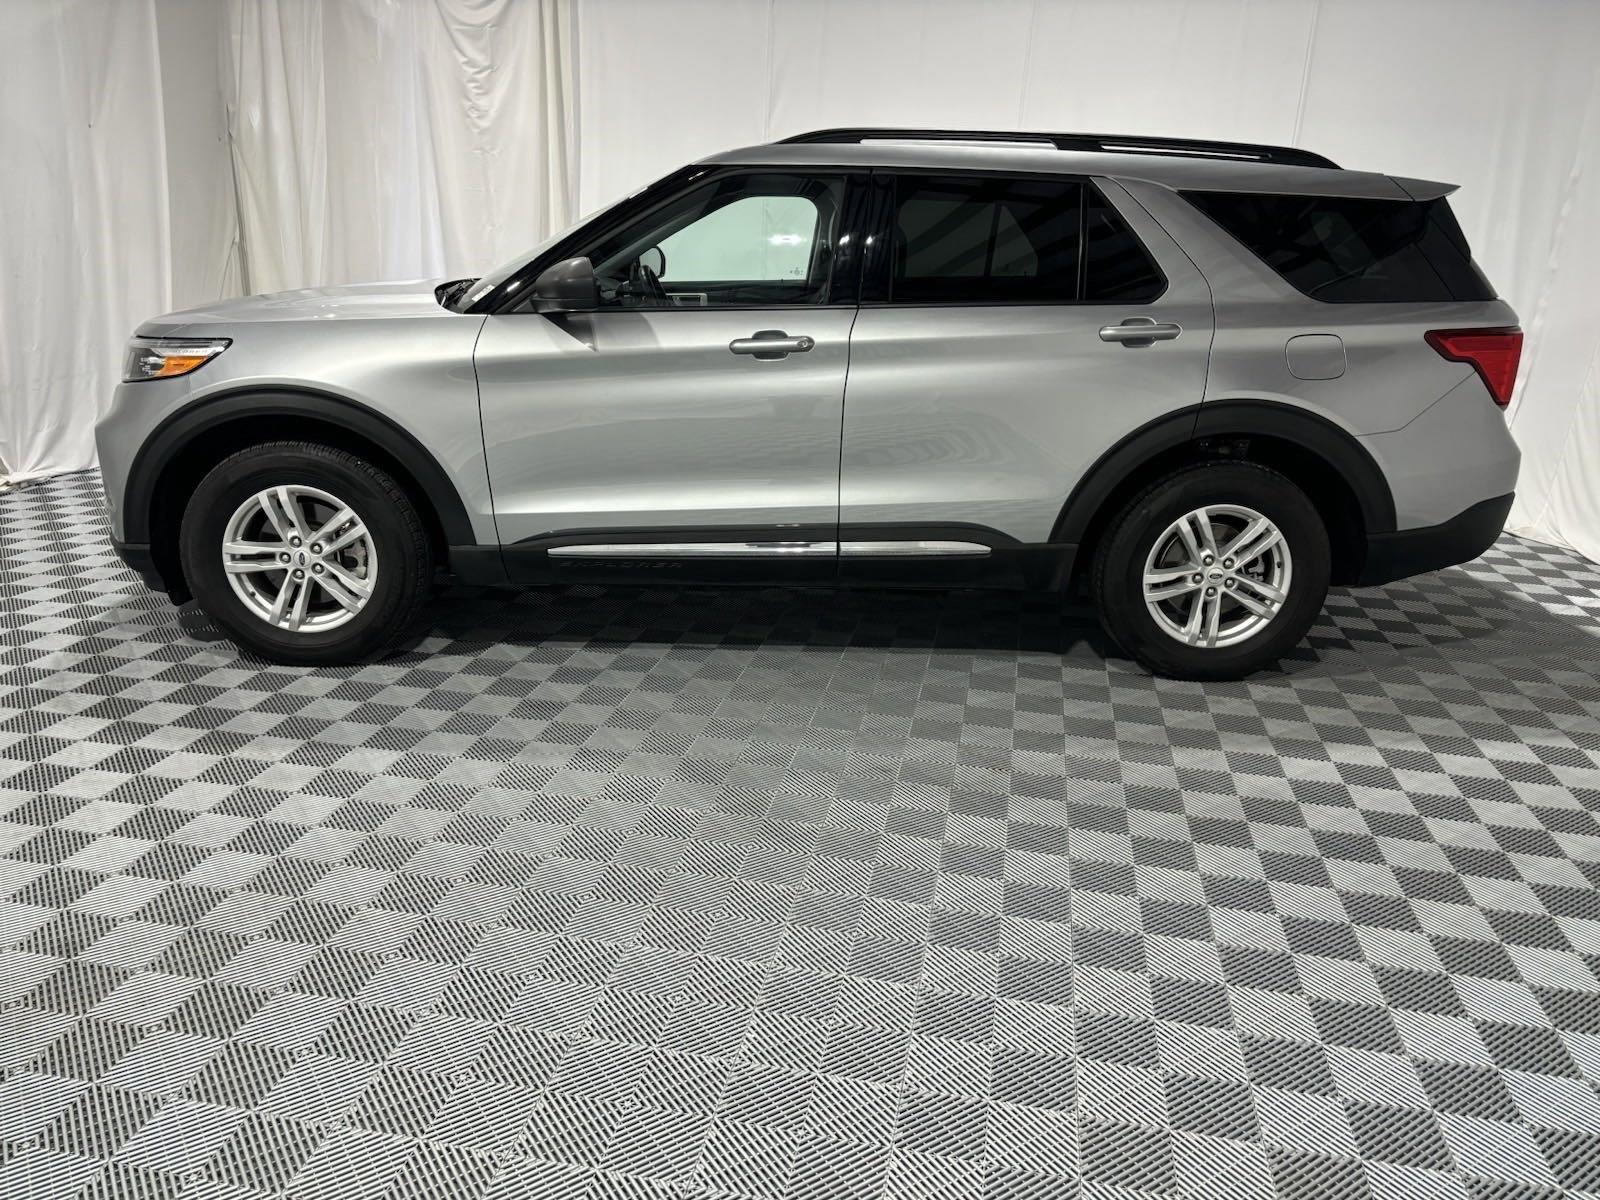 Used 2021 Ford Explorer XLT Sport Utility for sale in St Joseph MO